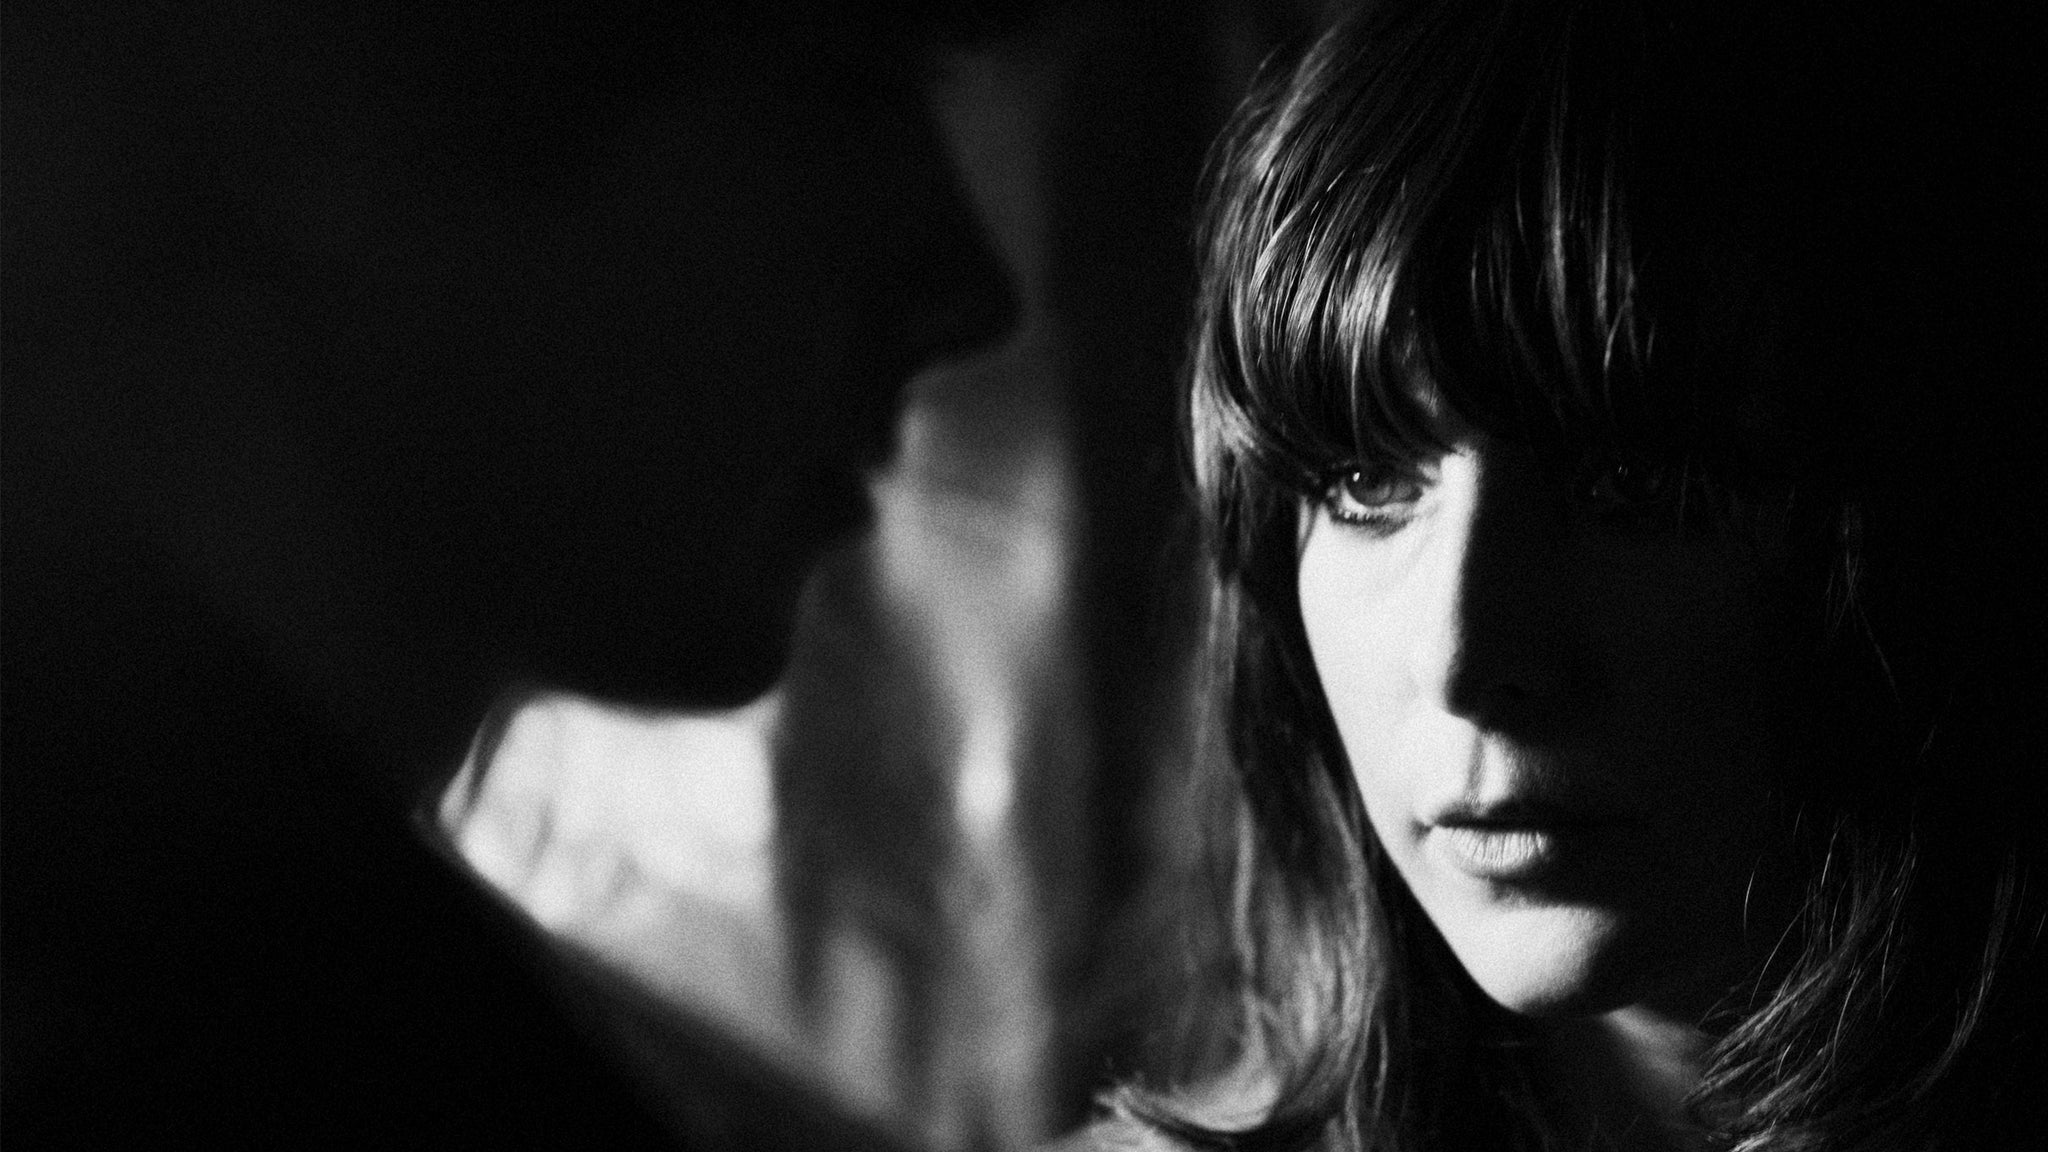 Beach House in Anaheim promo photo for Official Platinum presale offer code